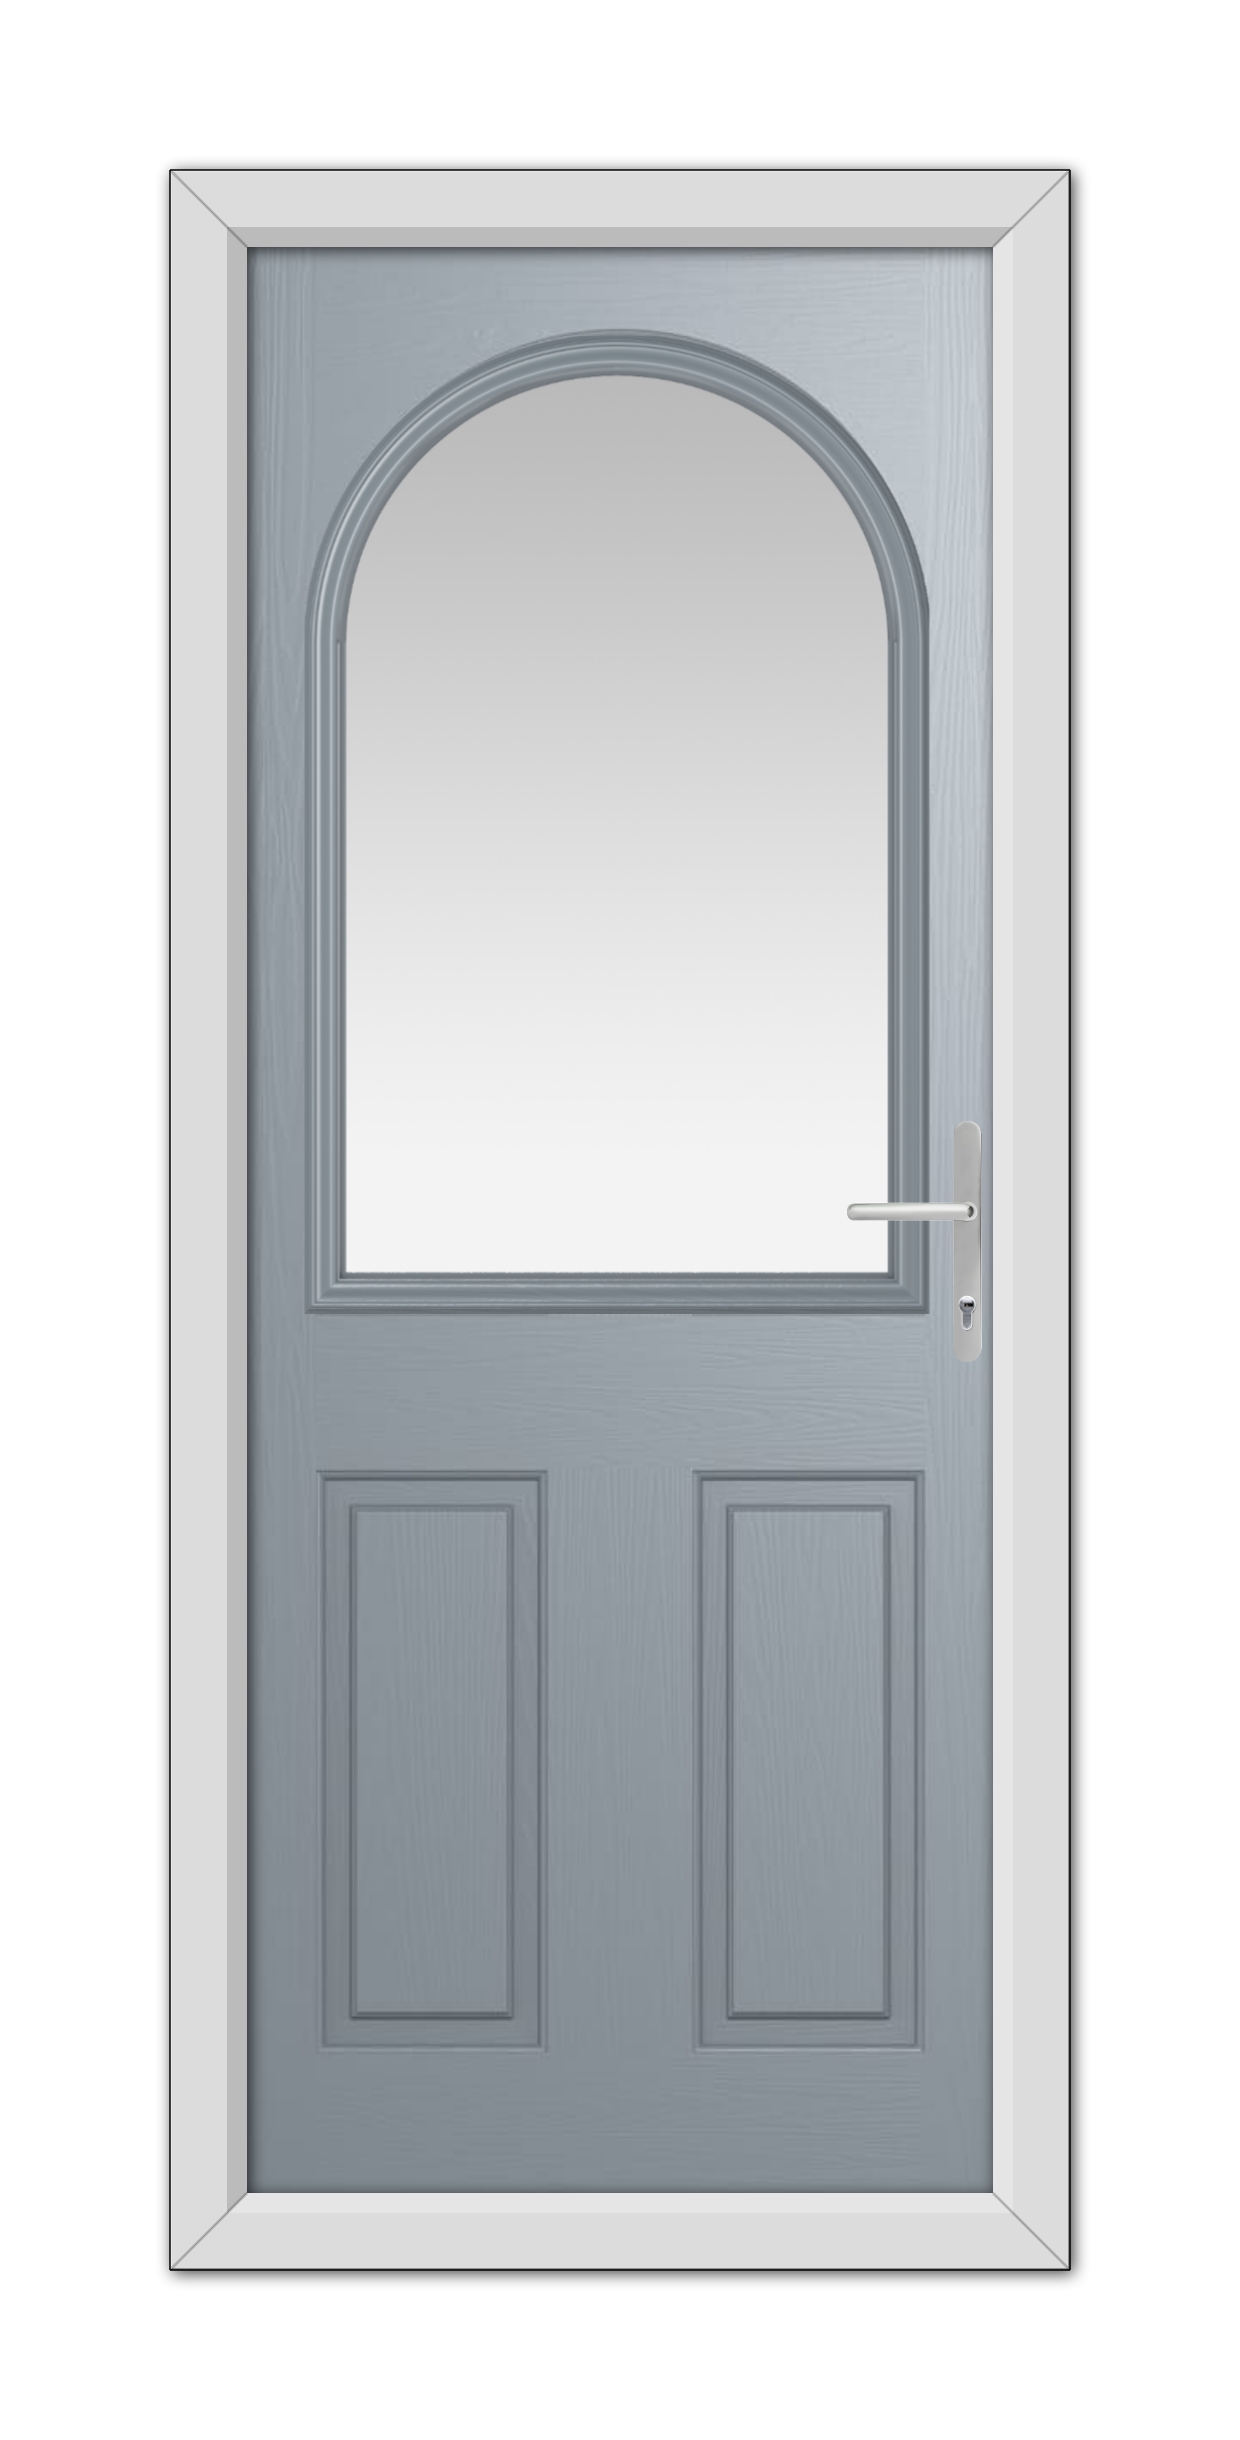 A French Grey Grafton Composite Door 48mm Timber Core with an arched top window, metal handle, and white frame isolated on a white background.